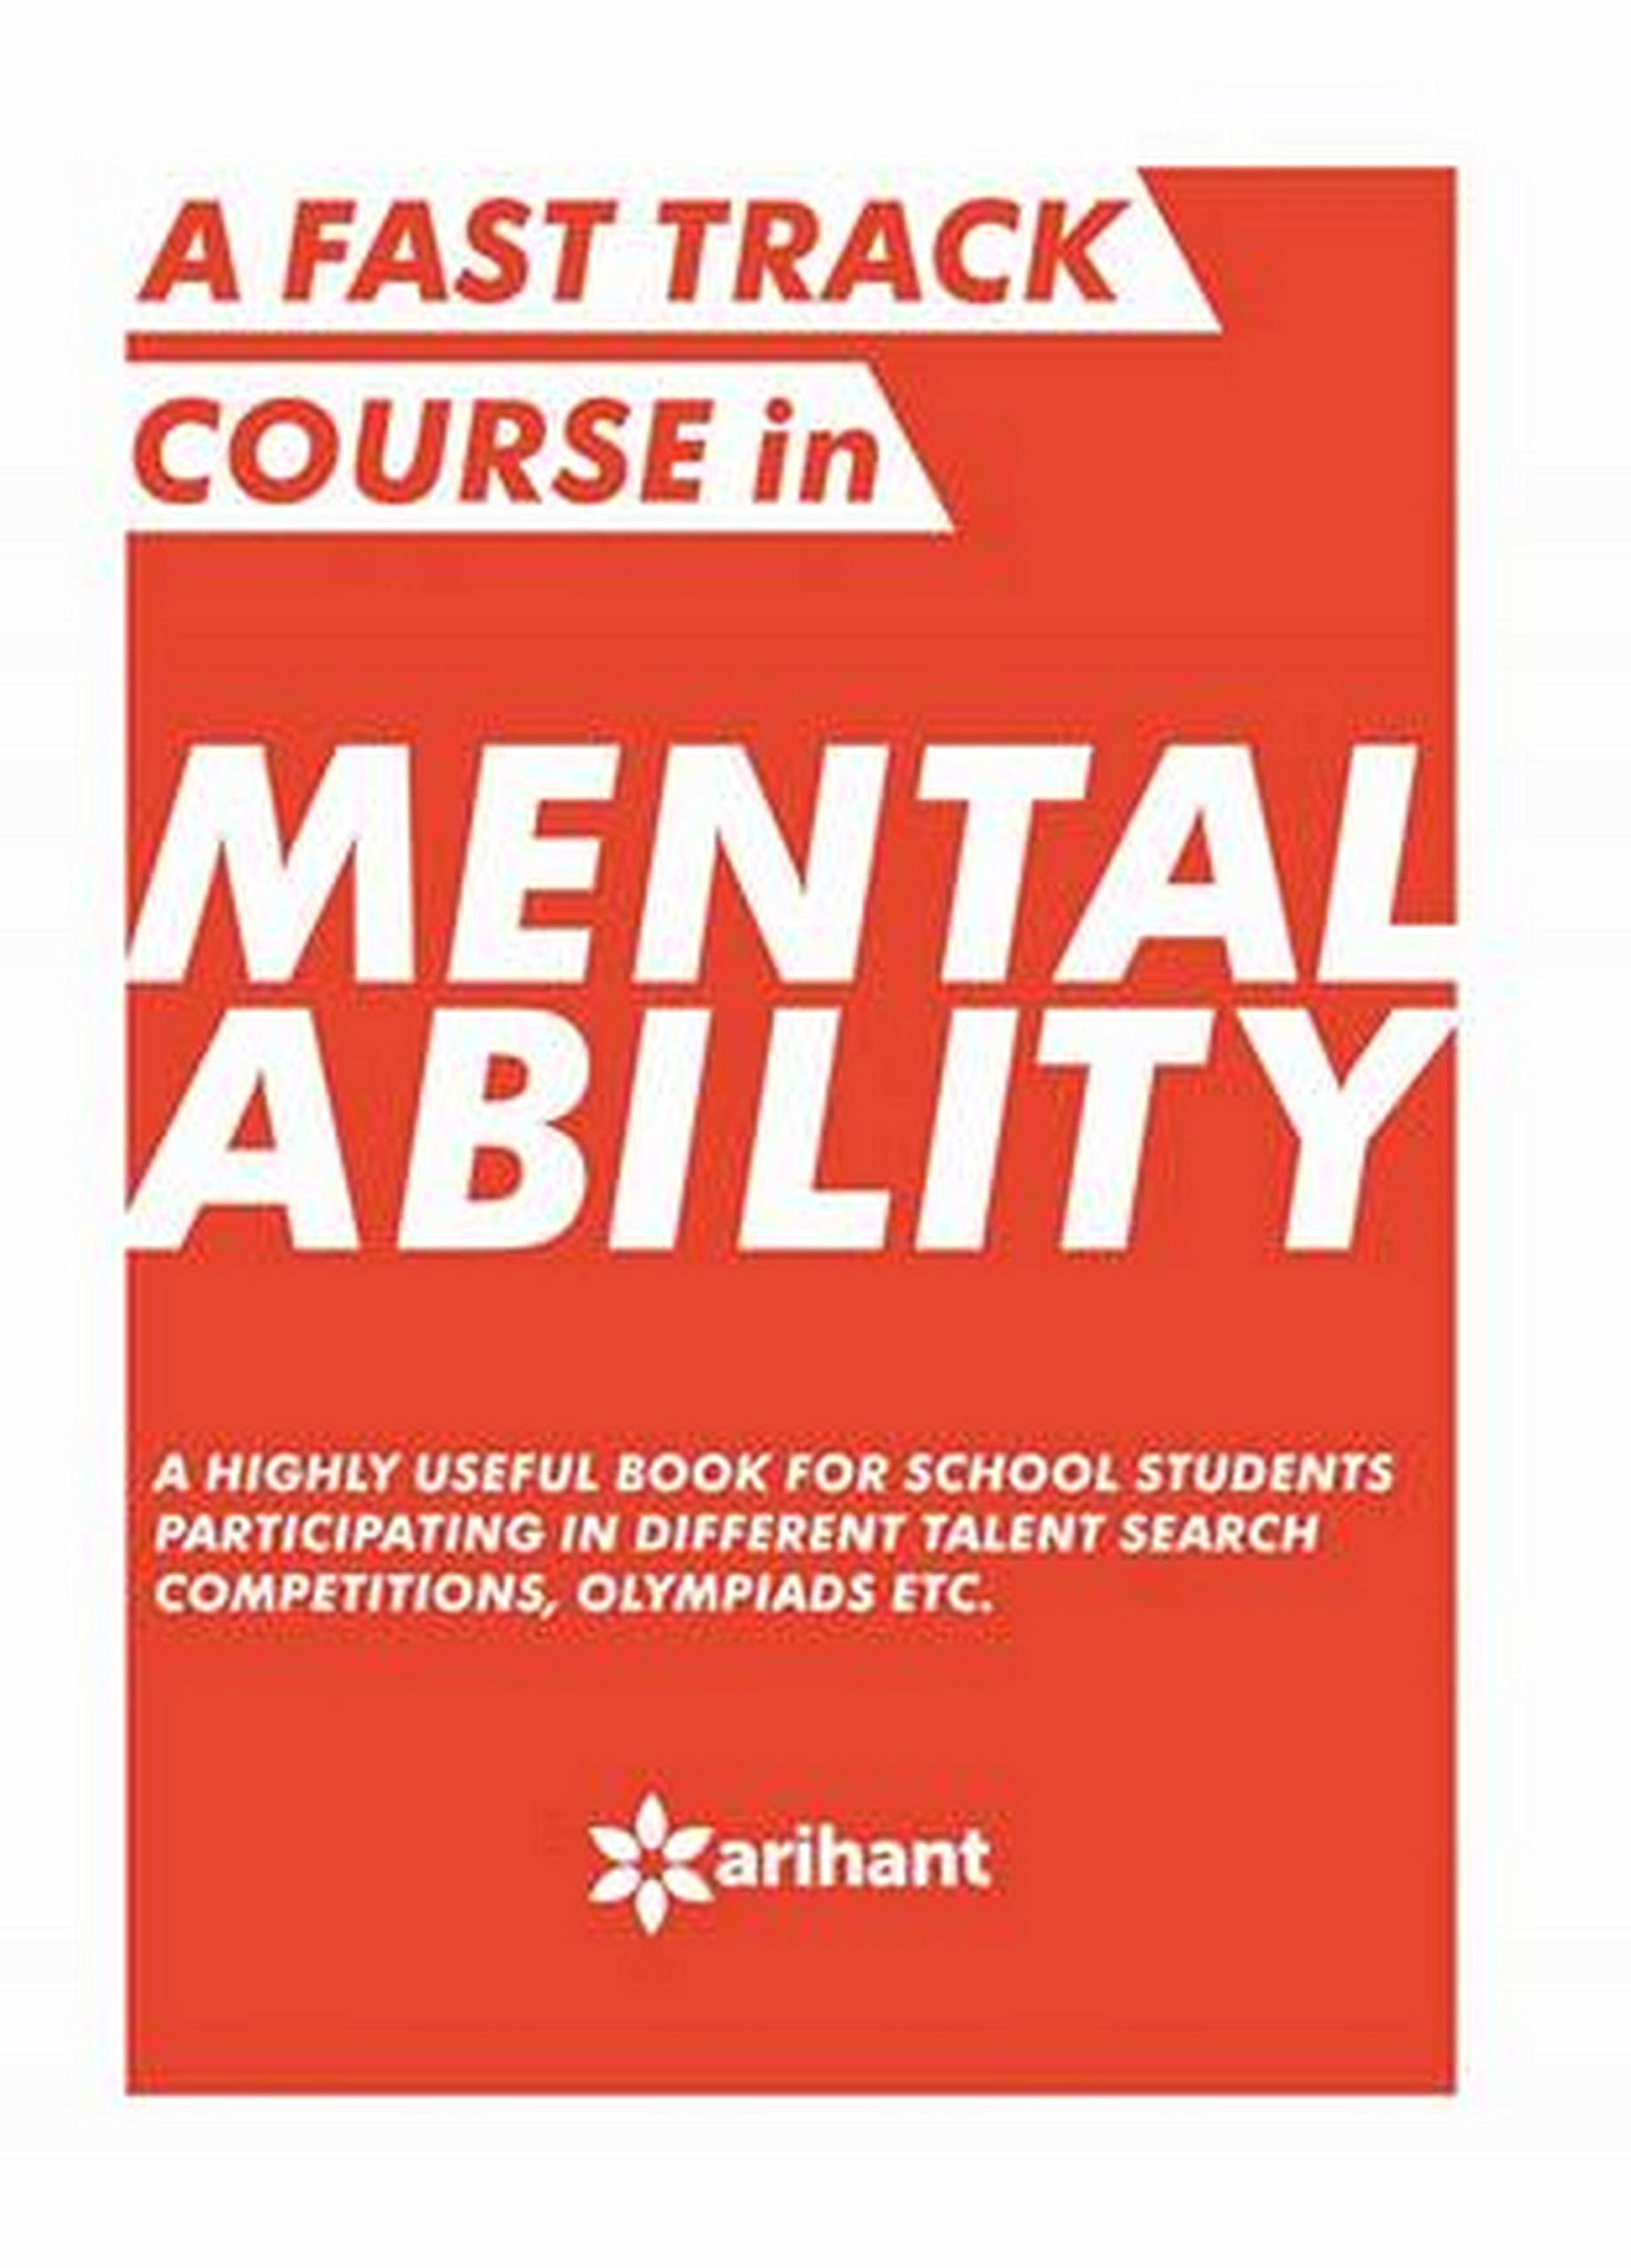 A Fast Track Course in MENTAL ABILITY